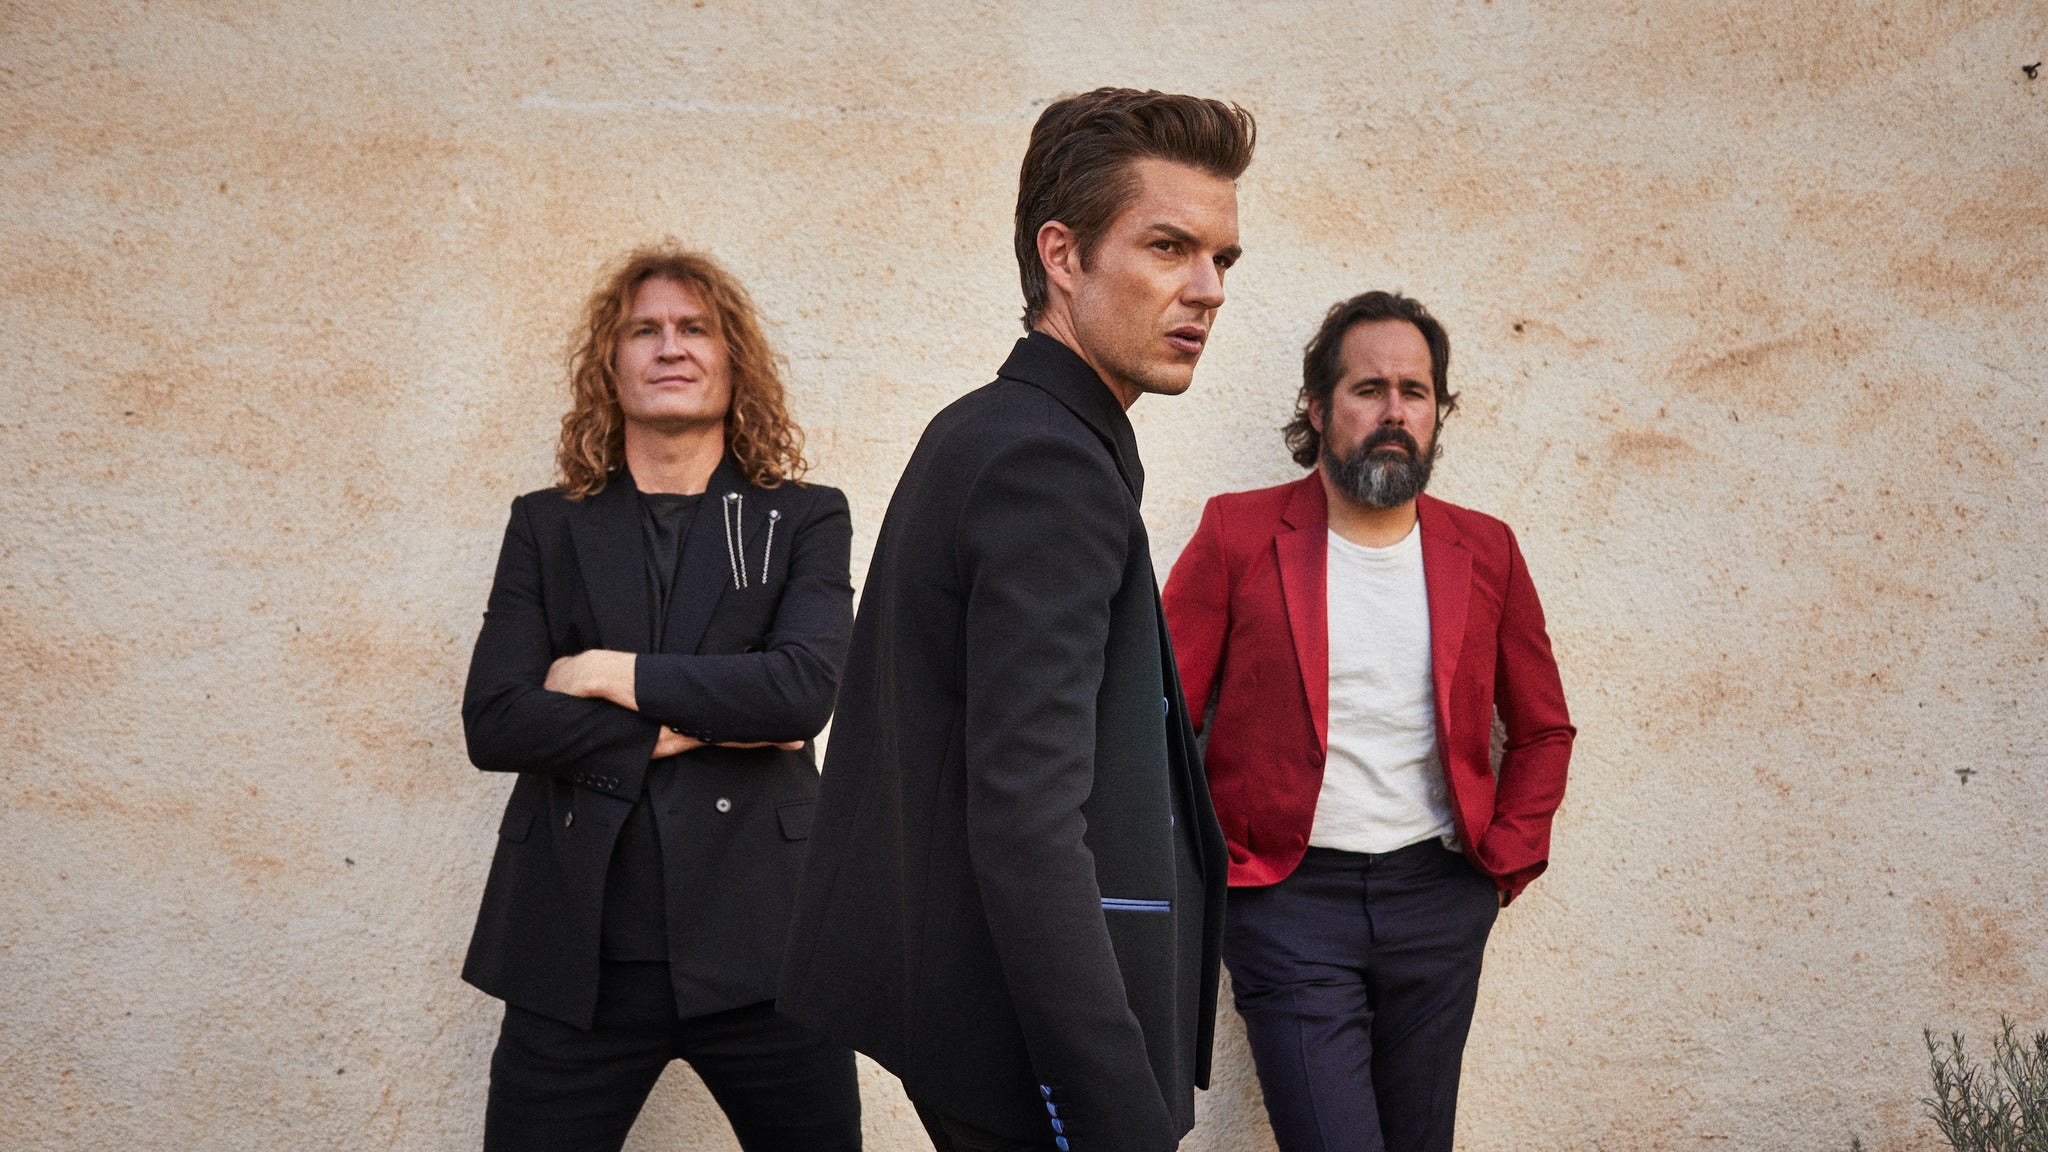 Image used with permission from Ticketmaster | a day on the green - The Killers (General Admission) tickets